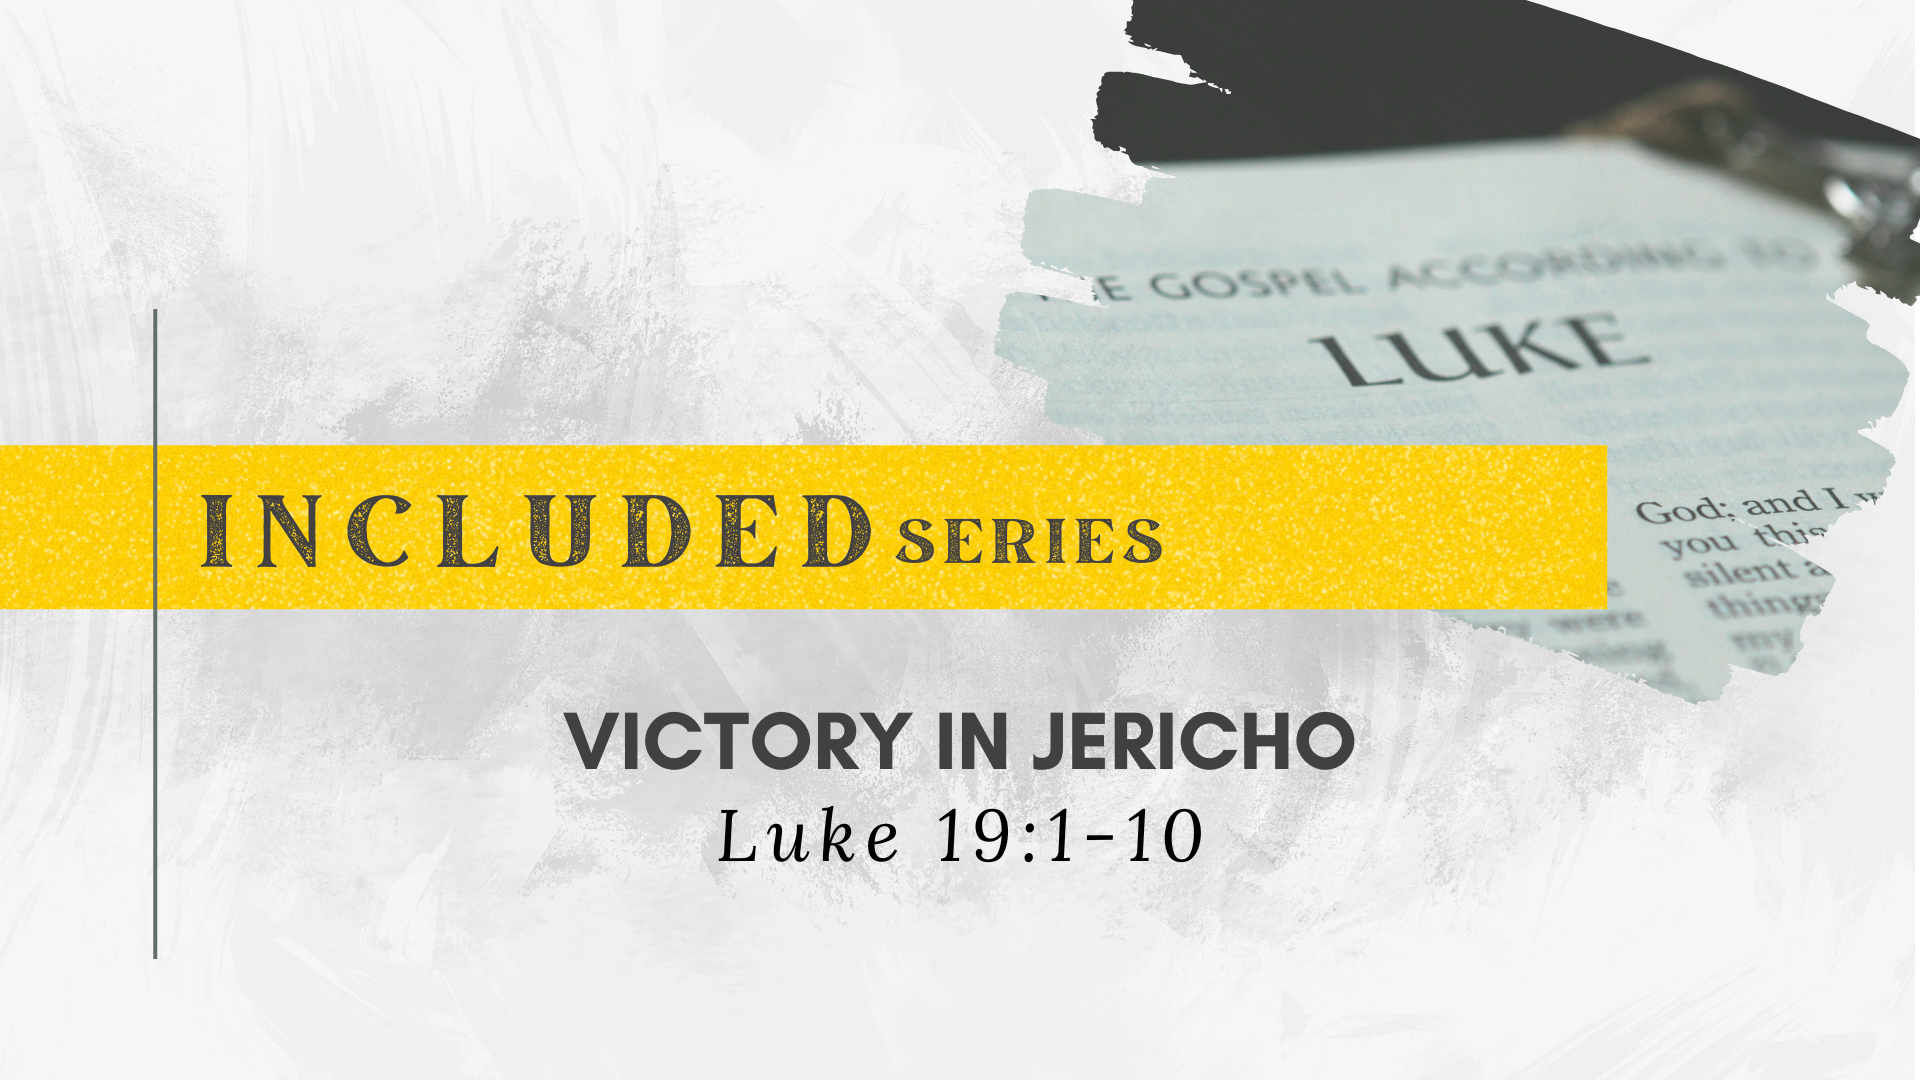 Victory in Jericho